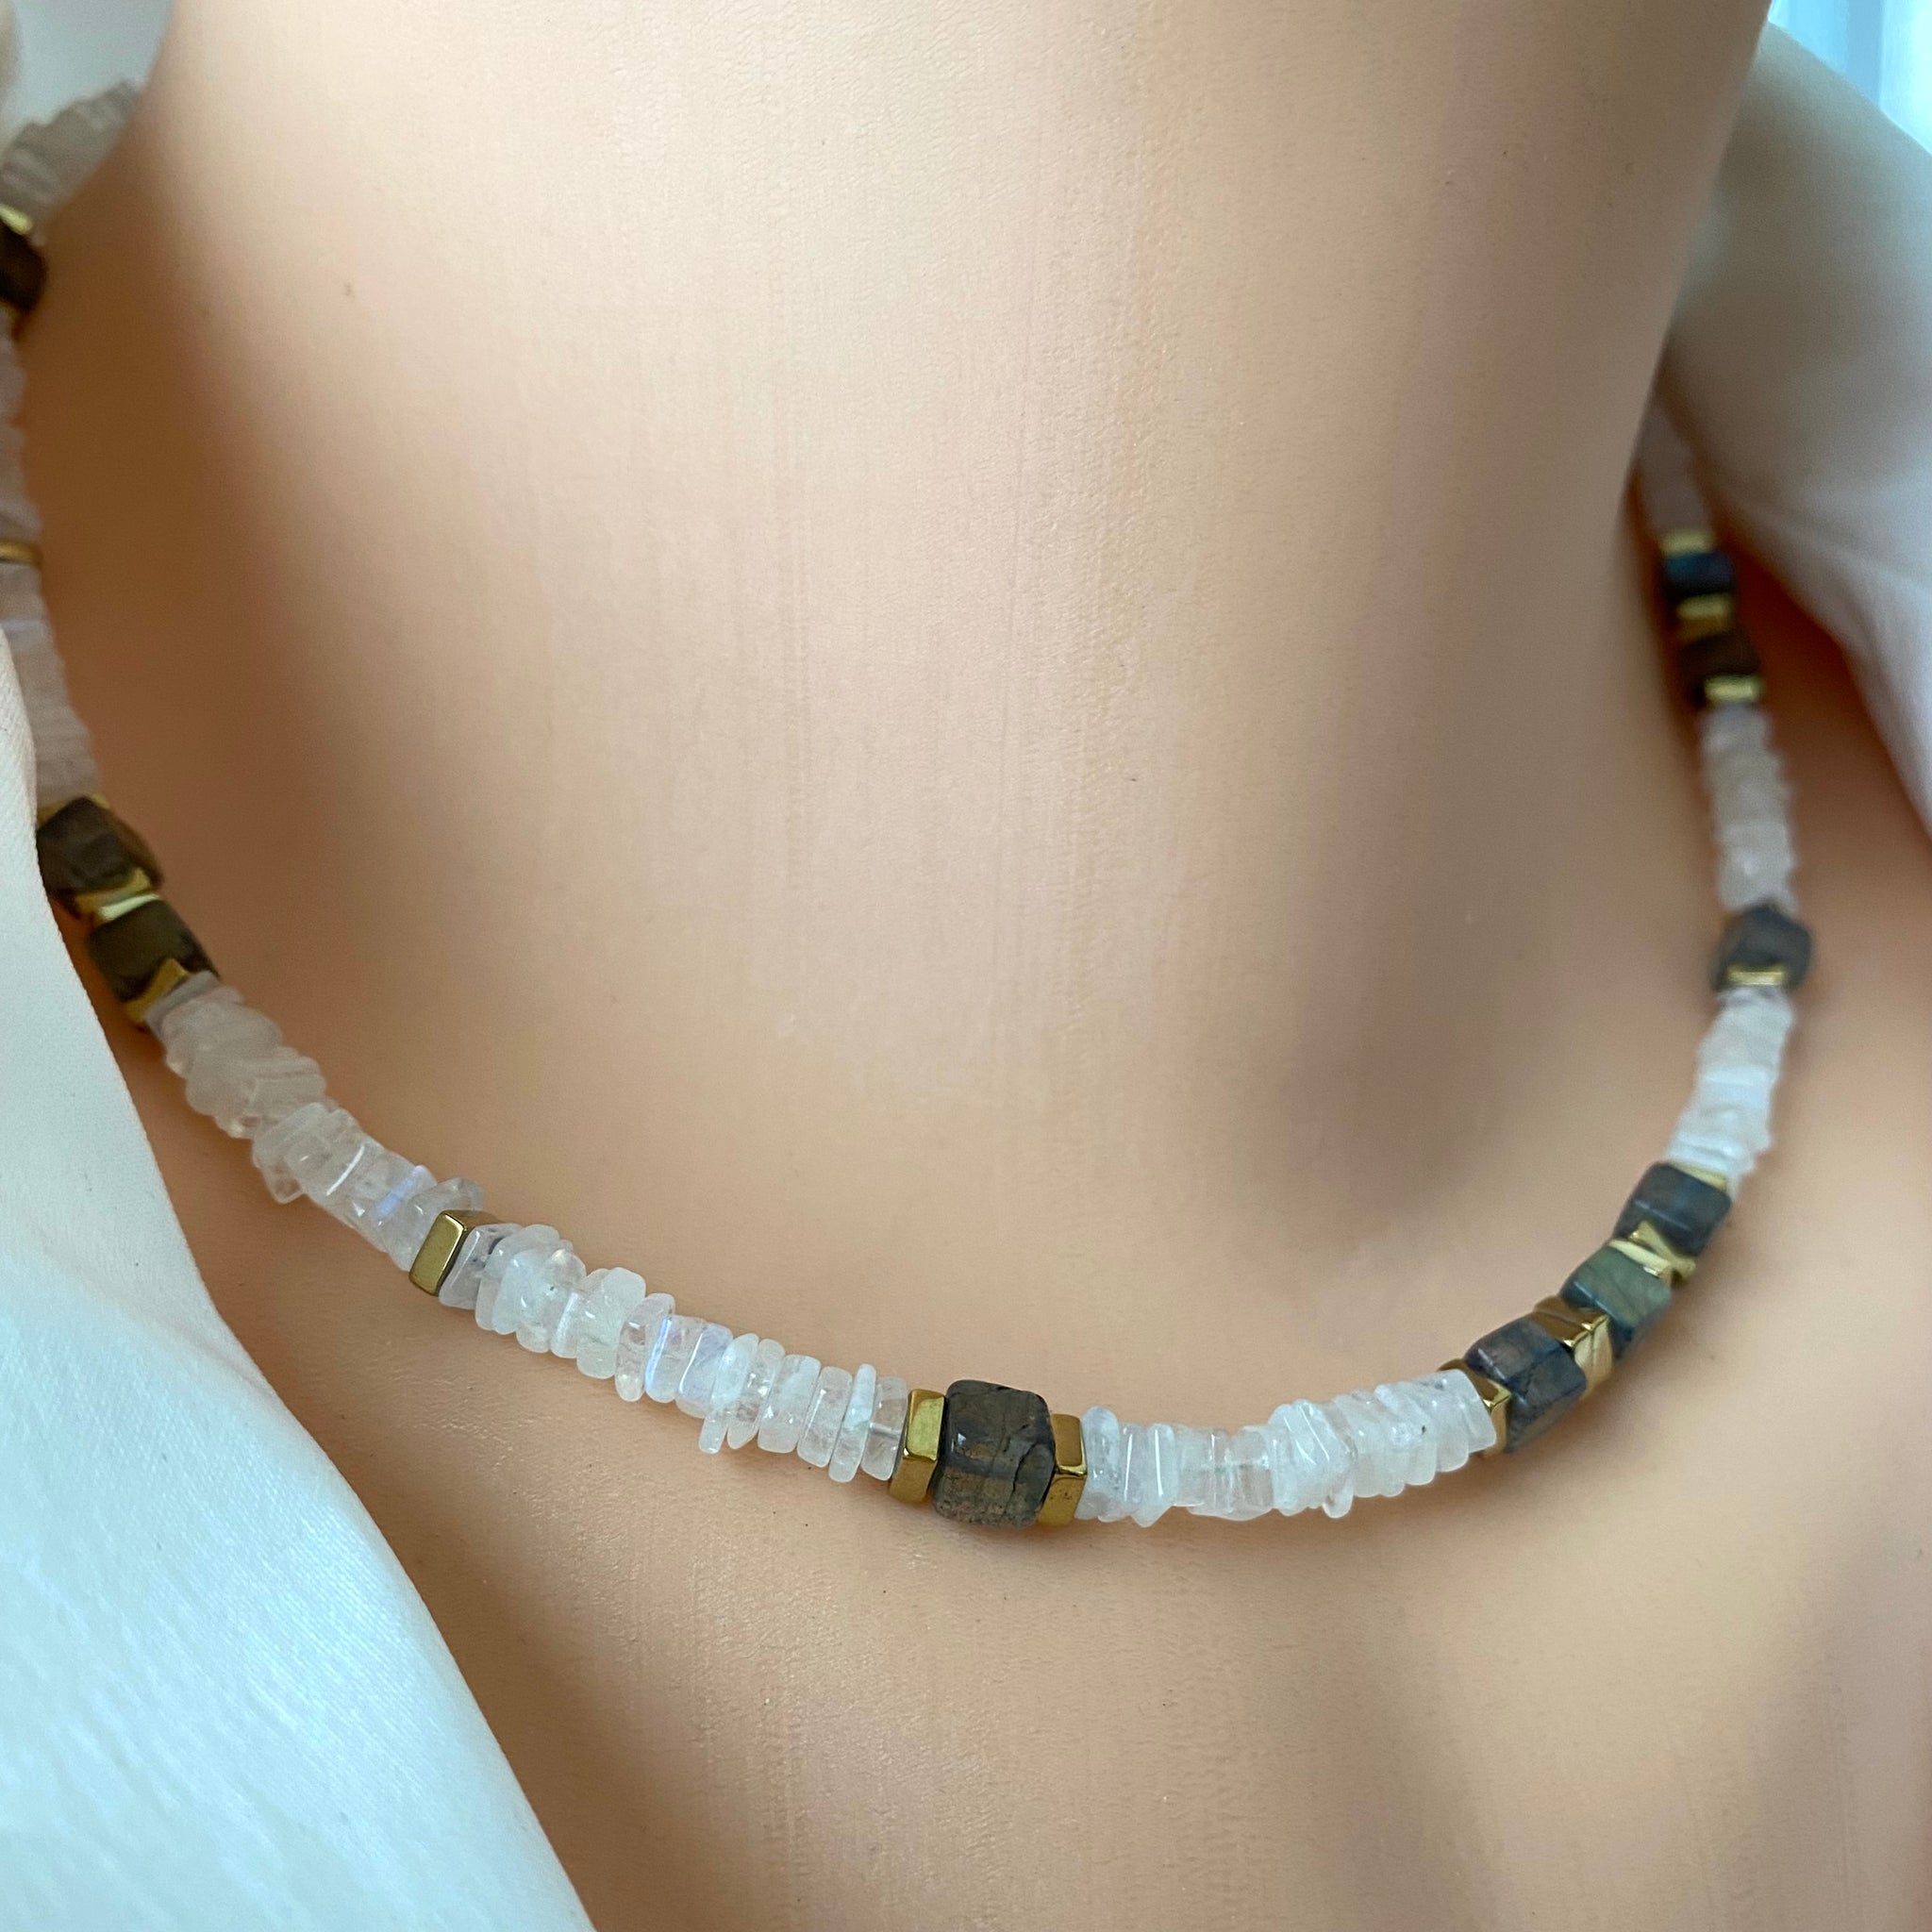 Moonstone & Labradorite Necklace, Gold Plated Magnetic Clasp, 17in